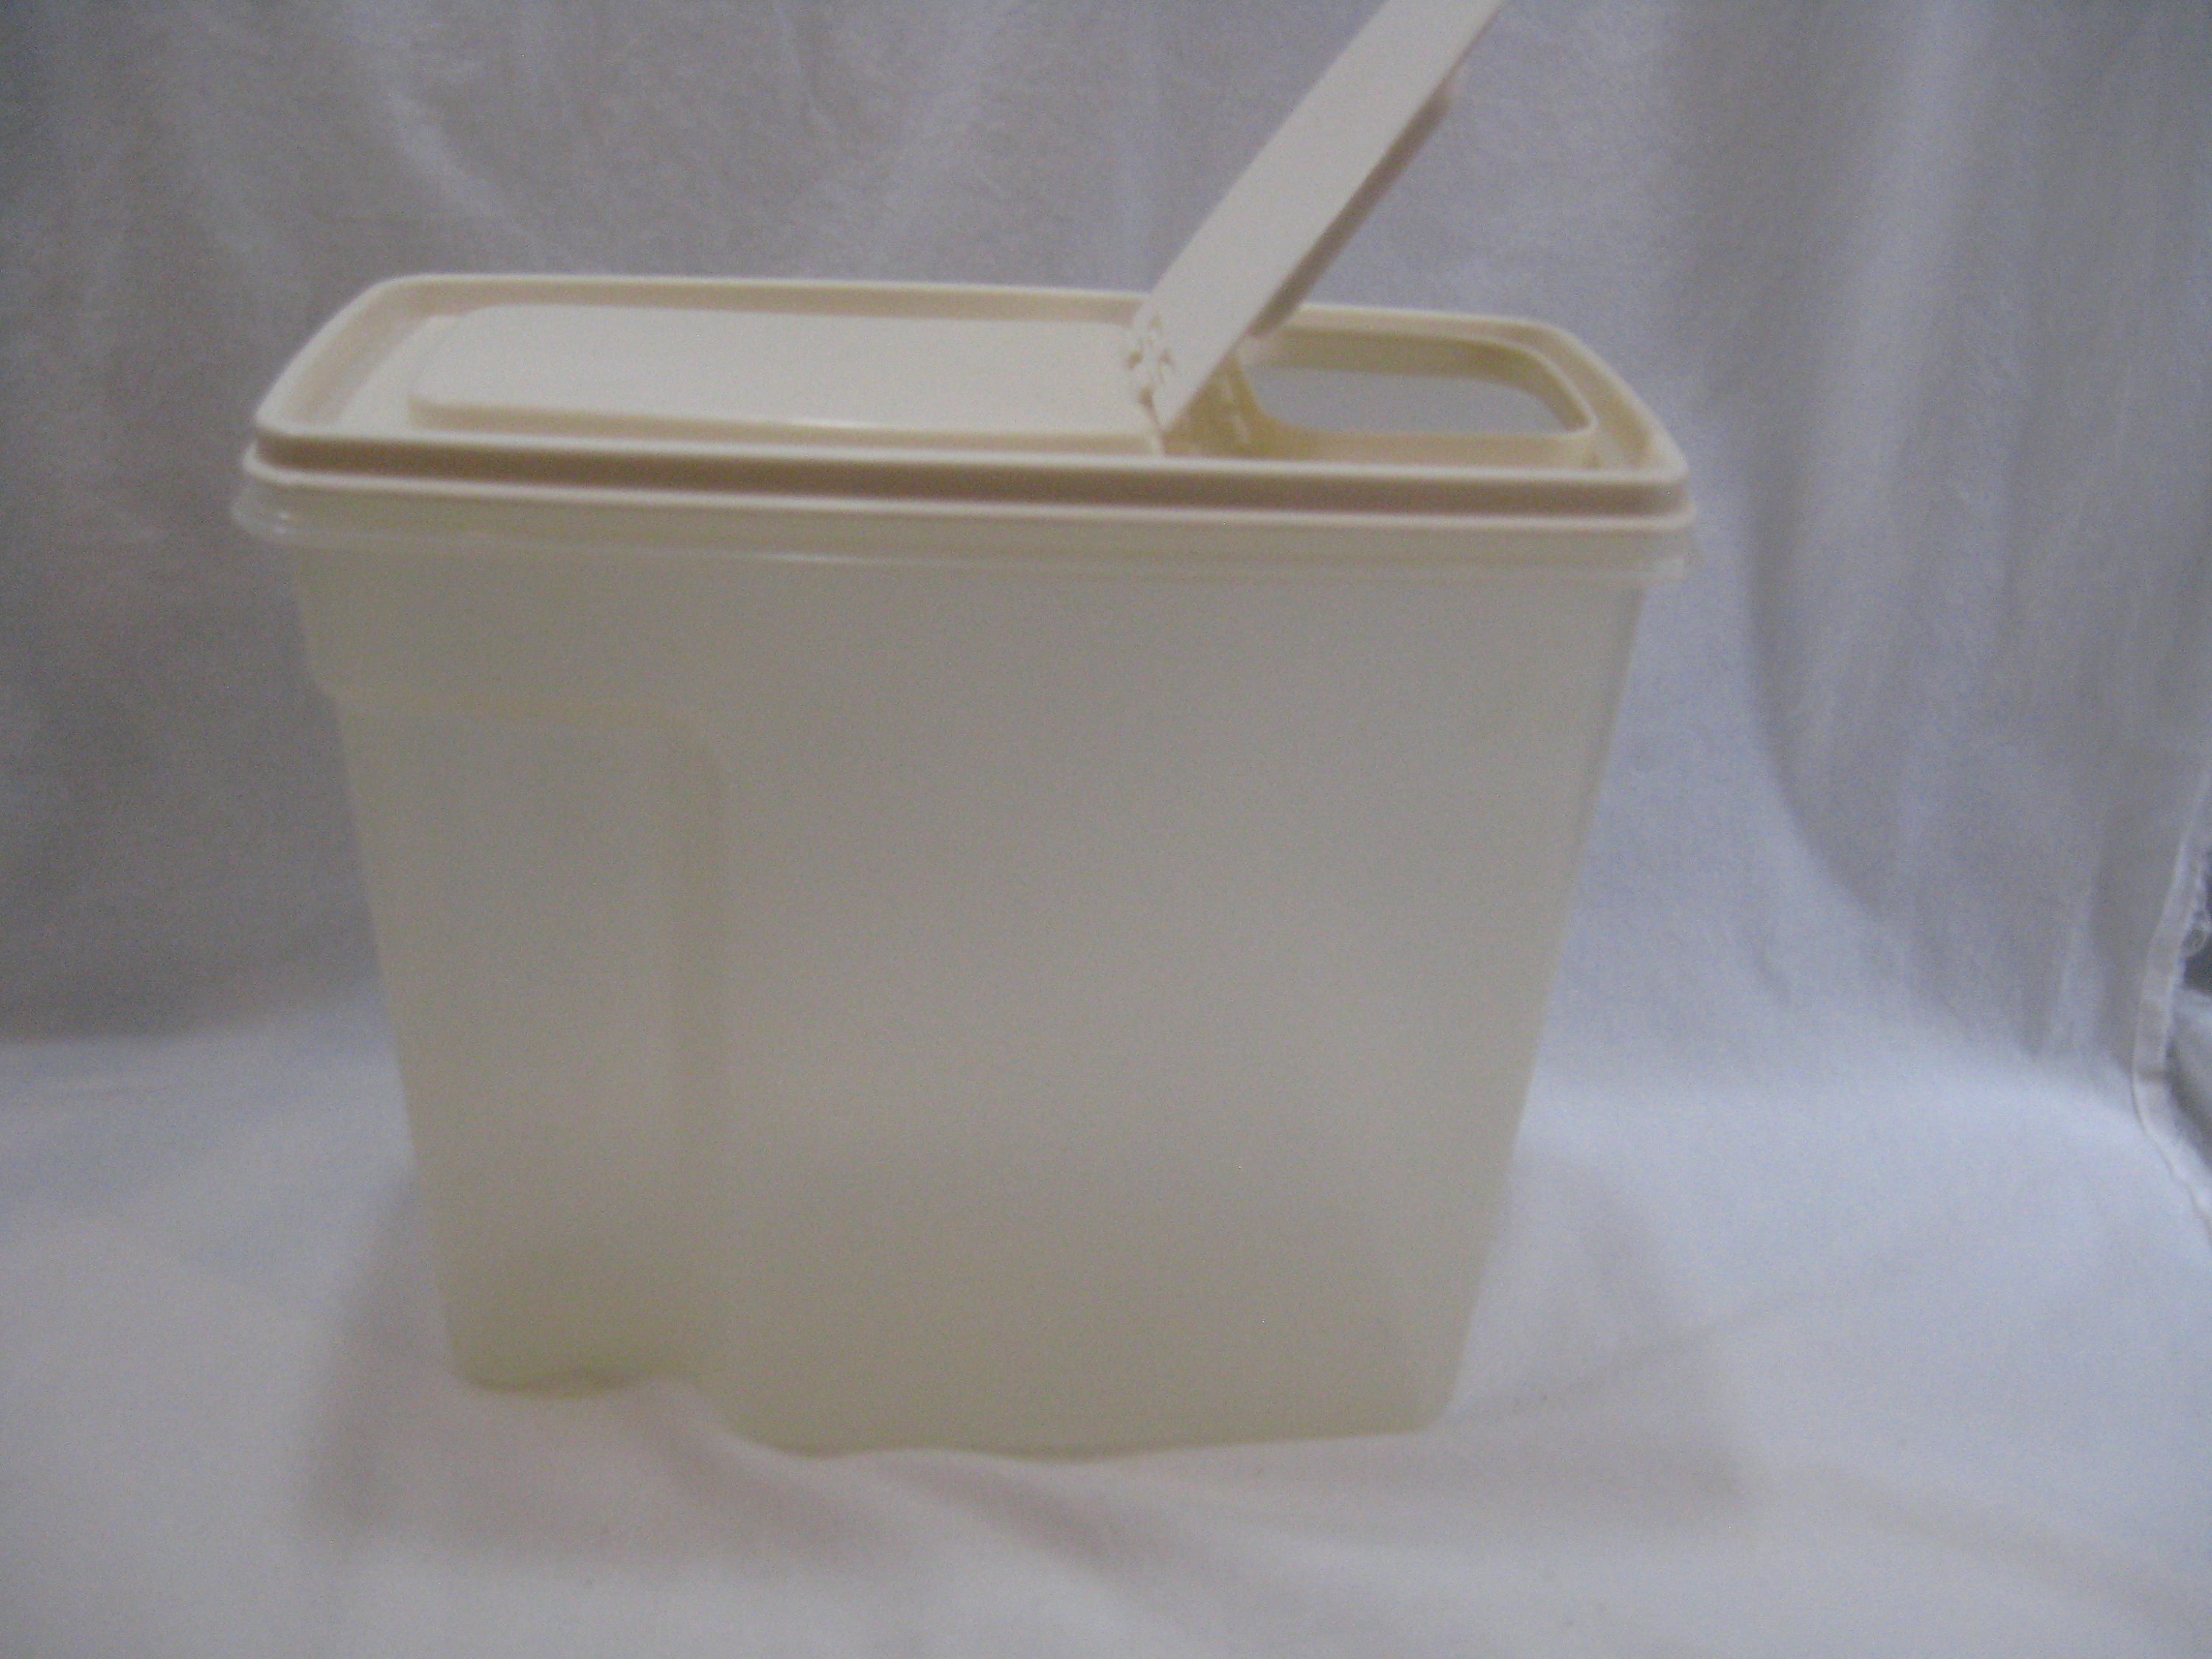 Rubbermaid Servin Saver 1 Pint Juice Bottle Drink Container 0229 White Lid